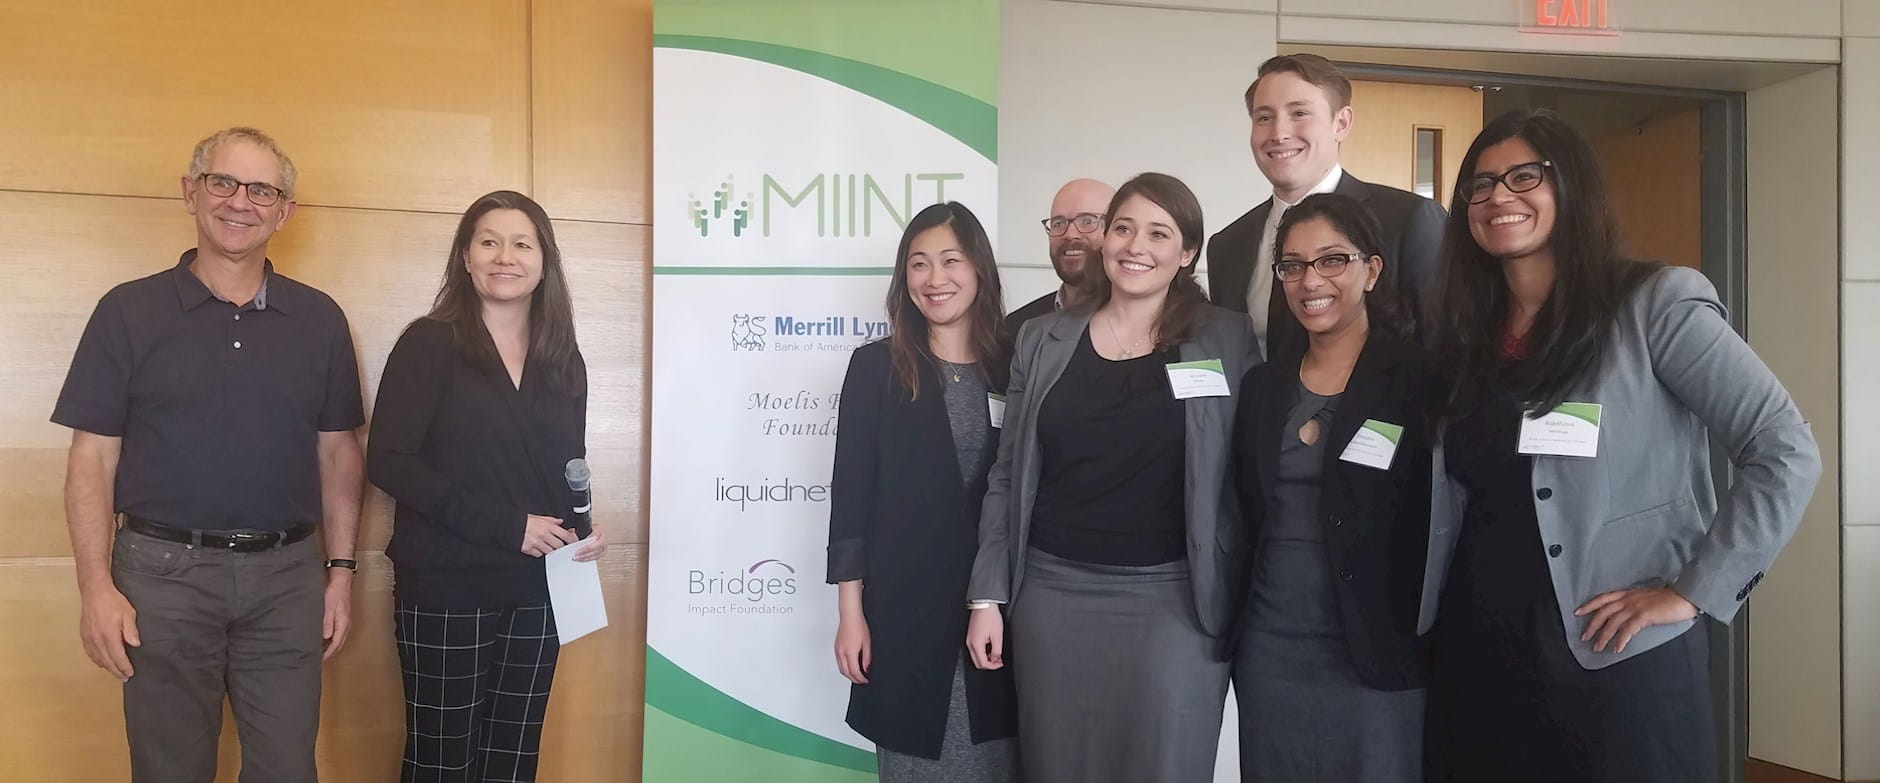 A team of Booth students after winning the MIINT competition at Wharton School of Business in 2018